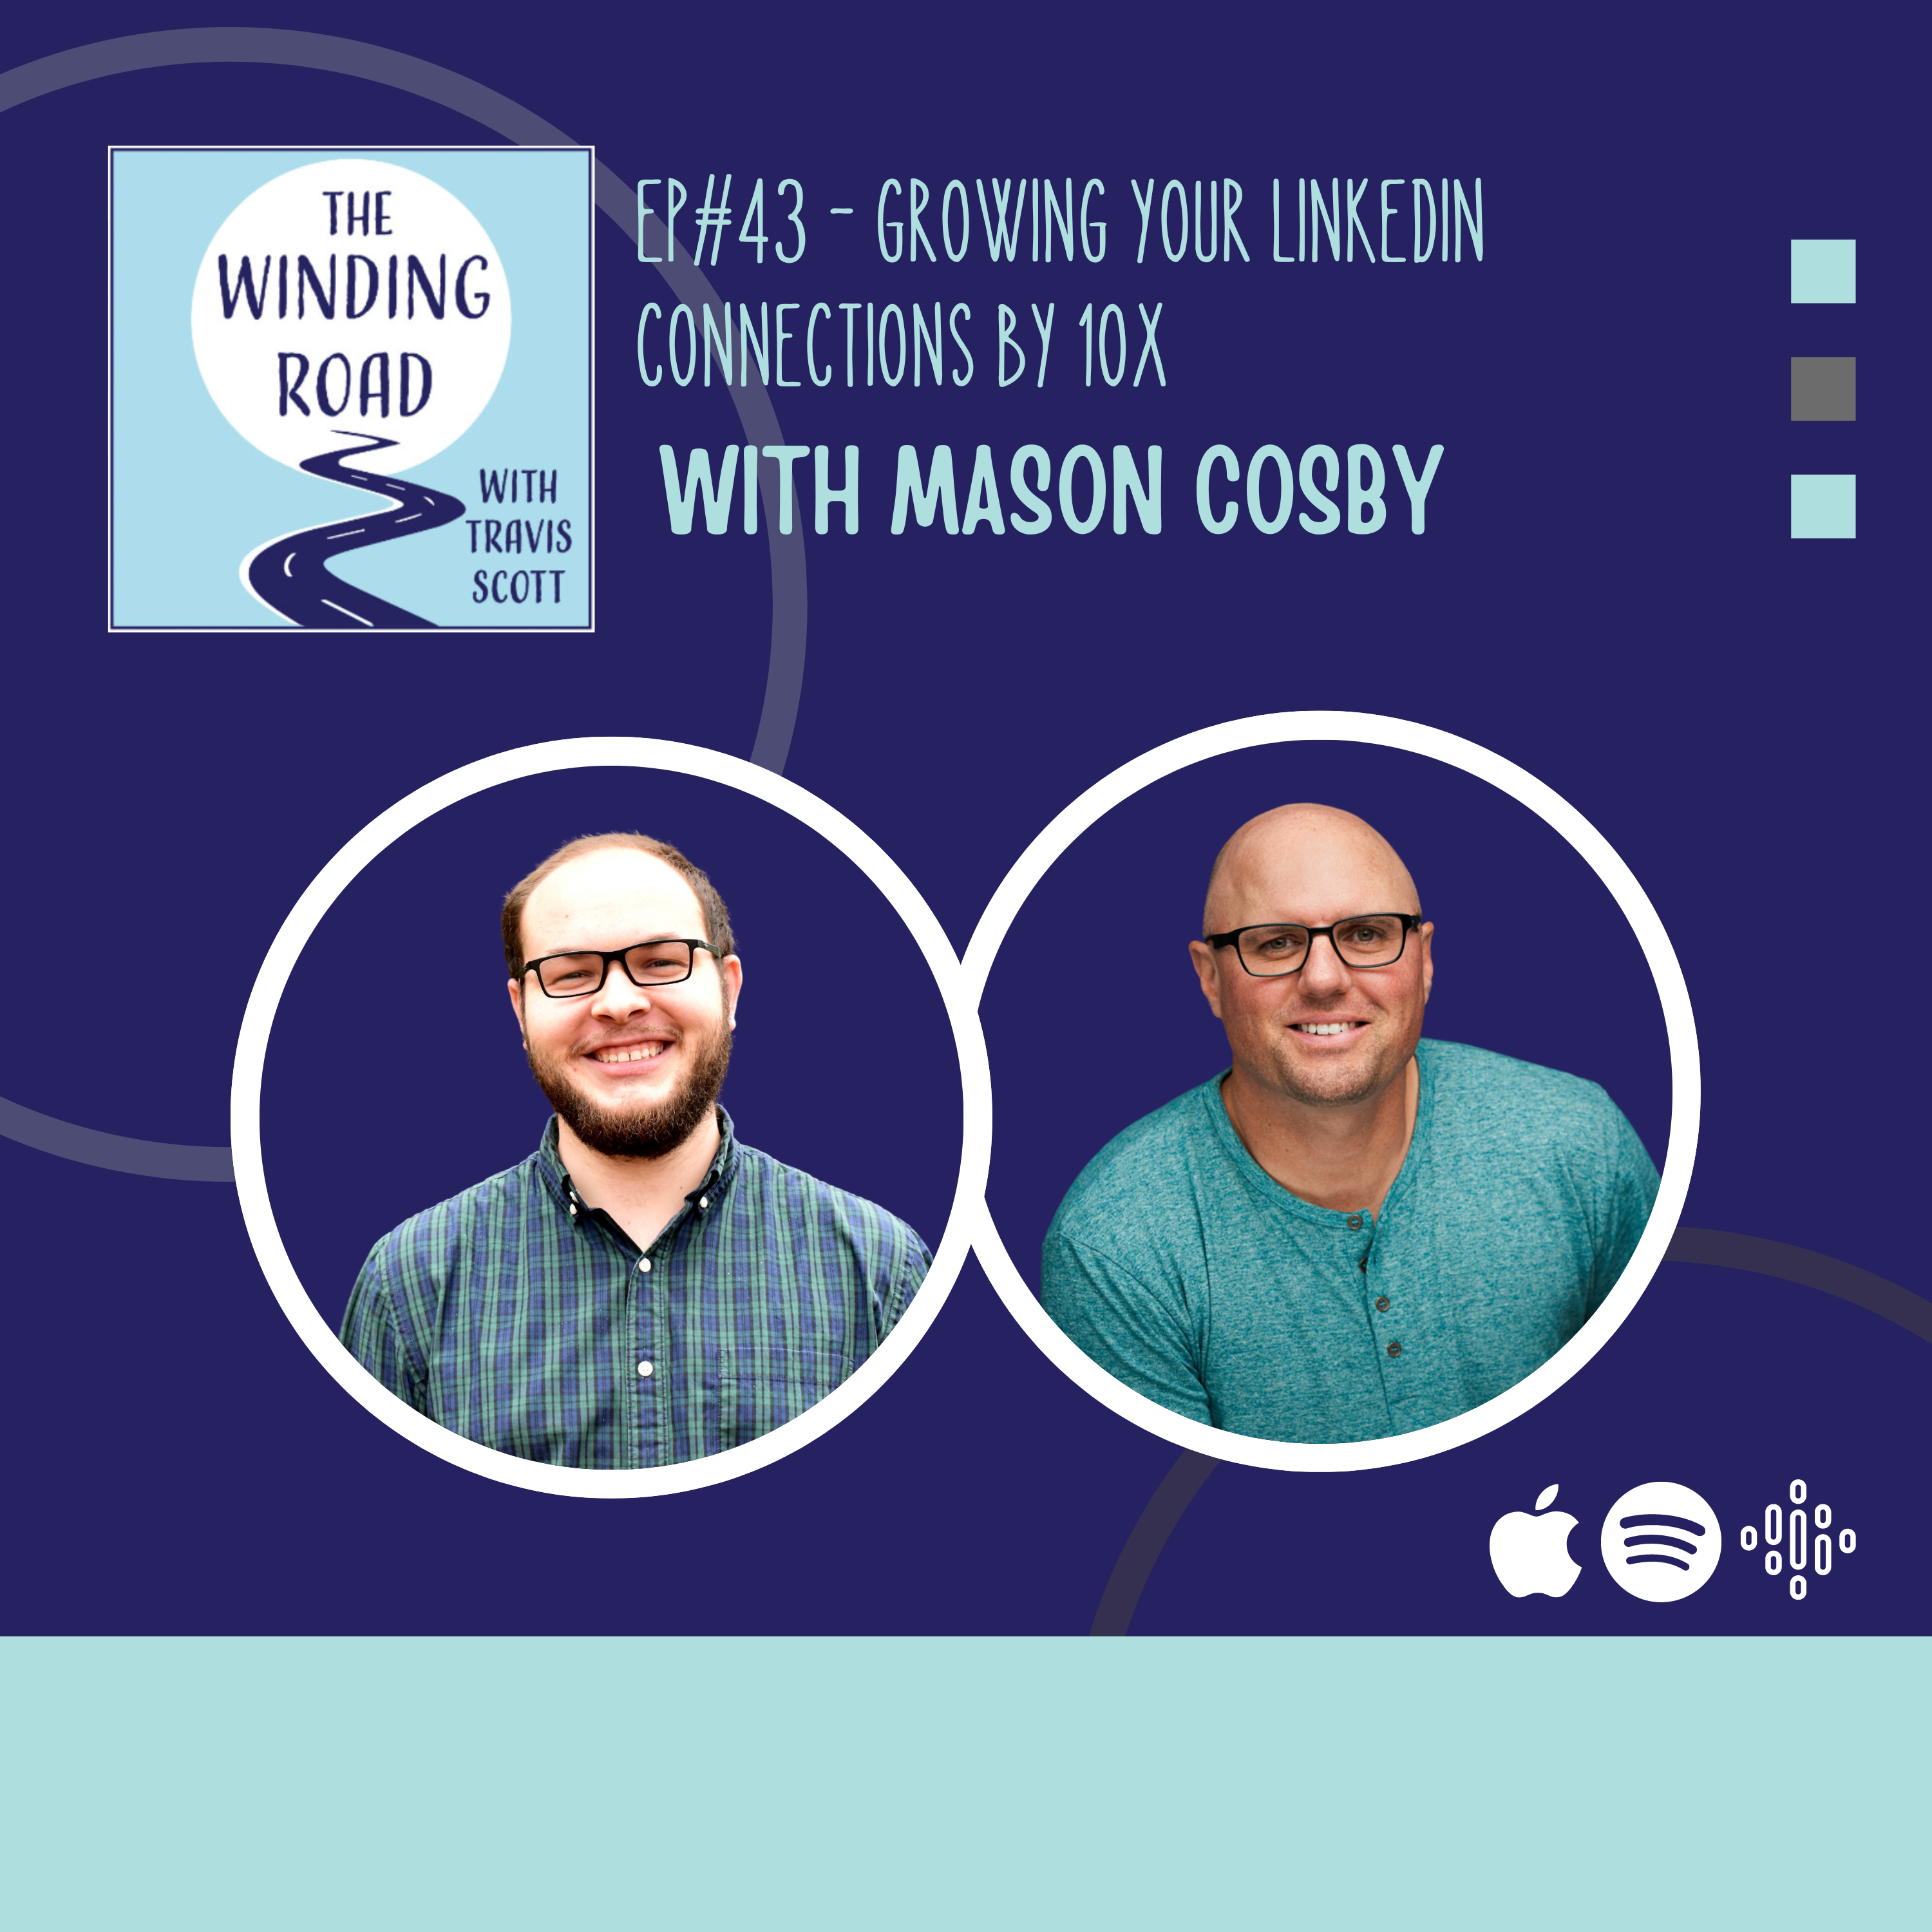 Mason Cosby, host of the Marketing Ladder Podcast, joins The Winding Road